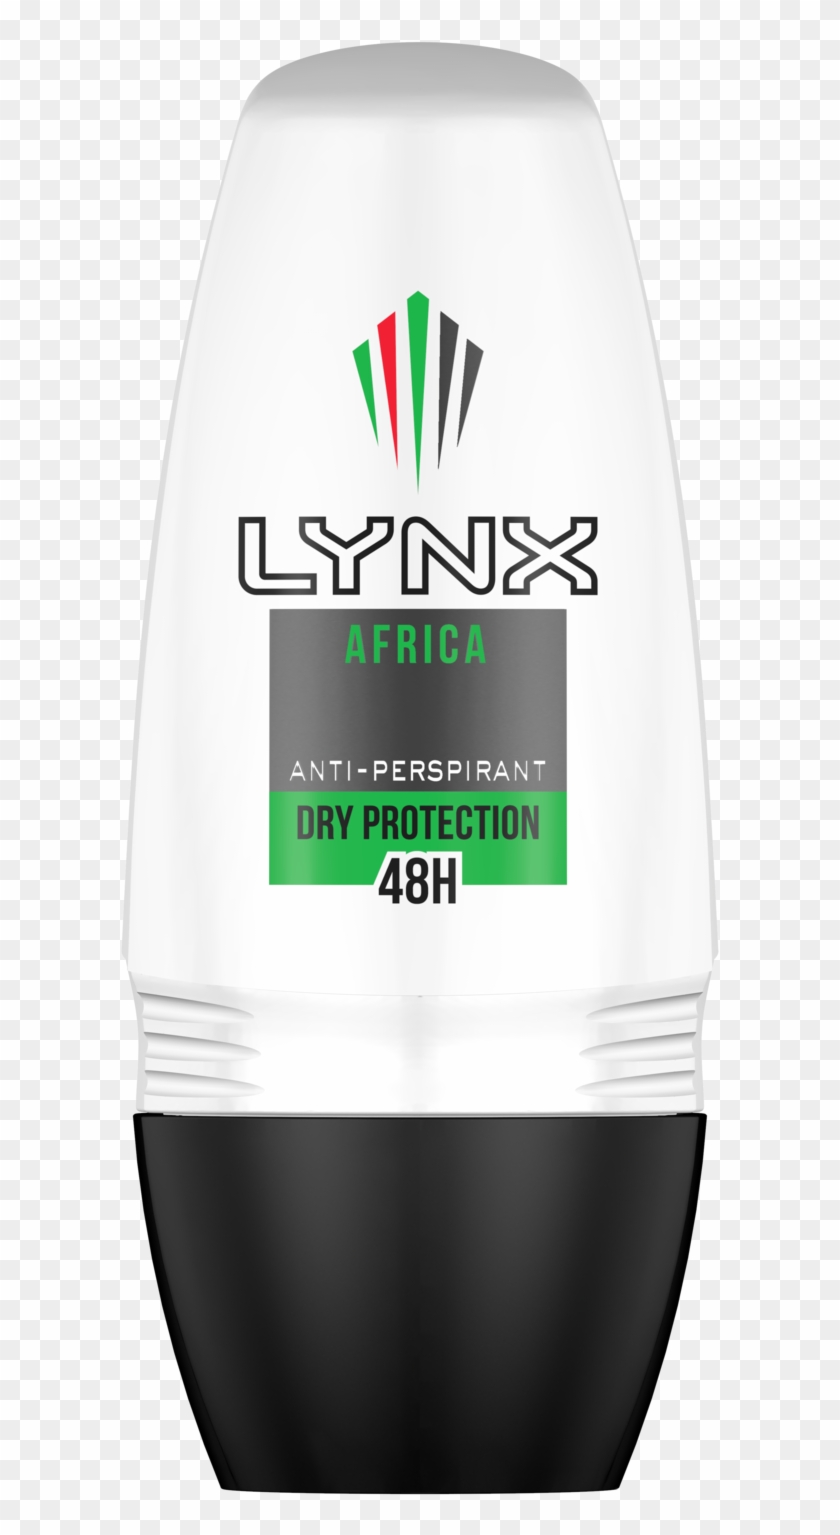 Lynx Png Clipart #1871893